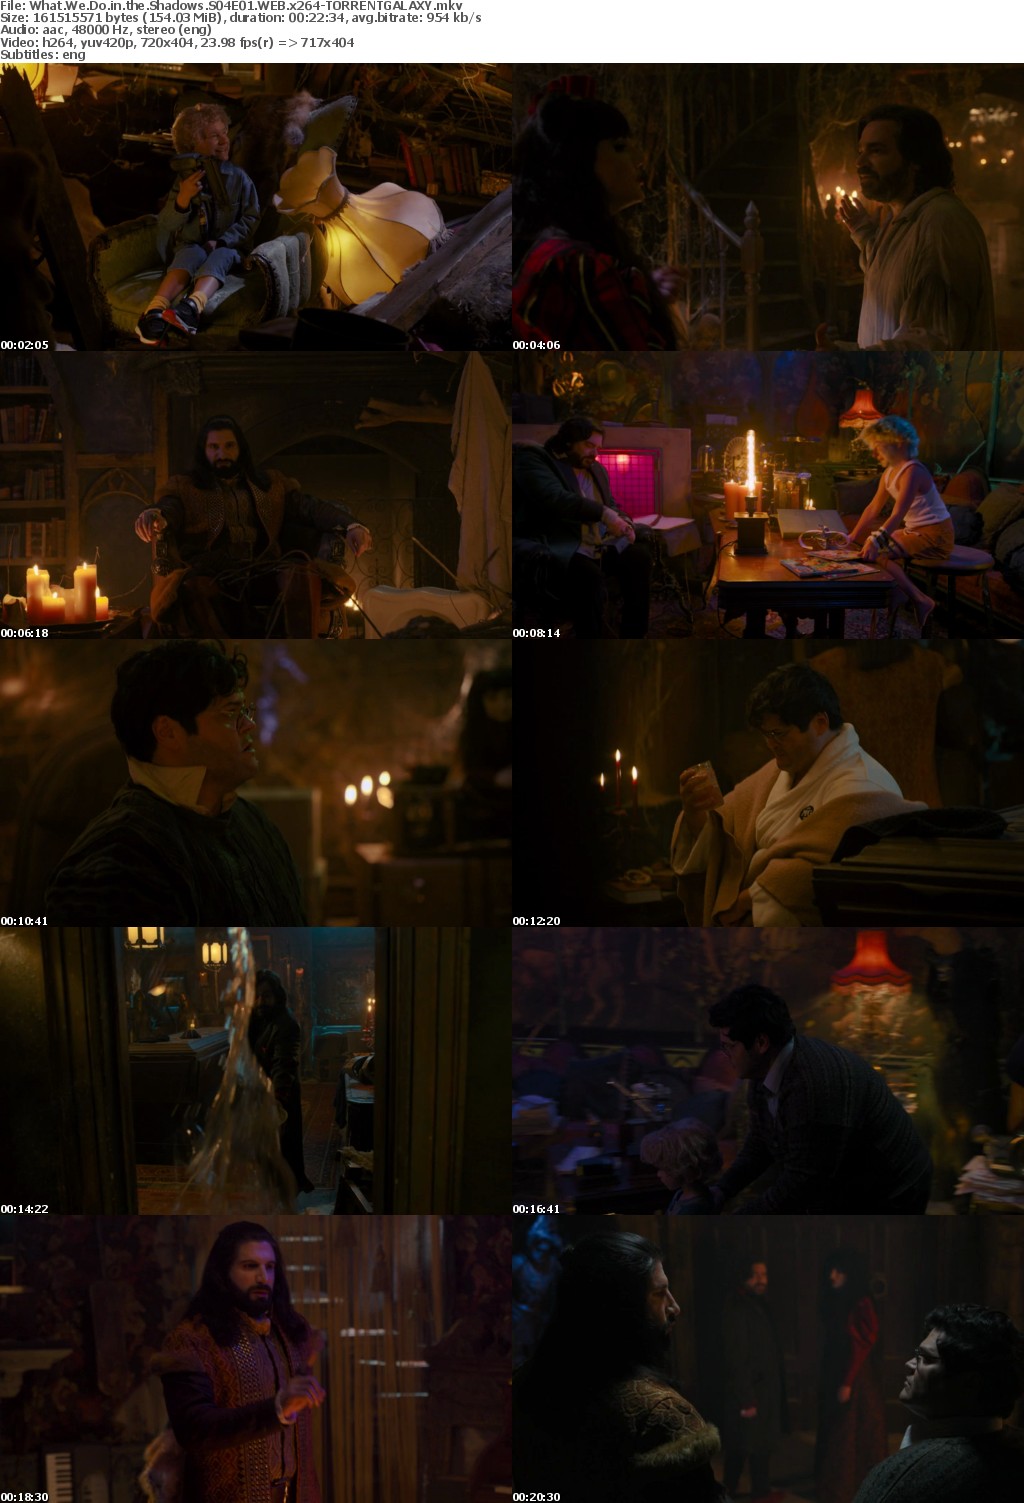 What We Do in the Shadows S04E01 WEB x264-GALAXY